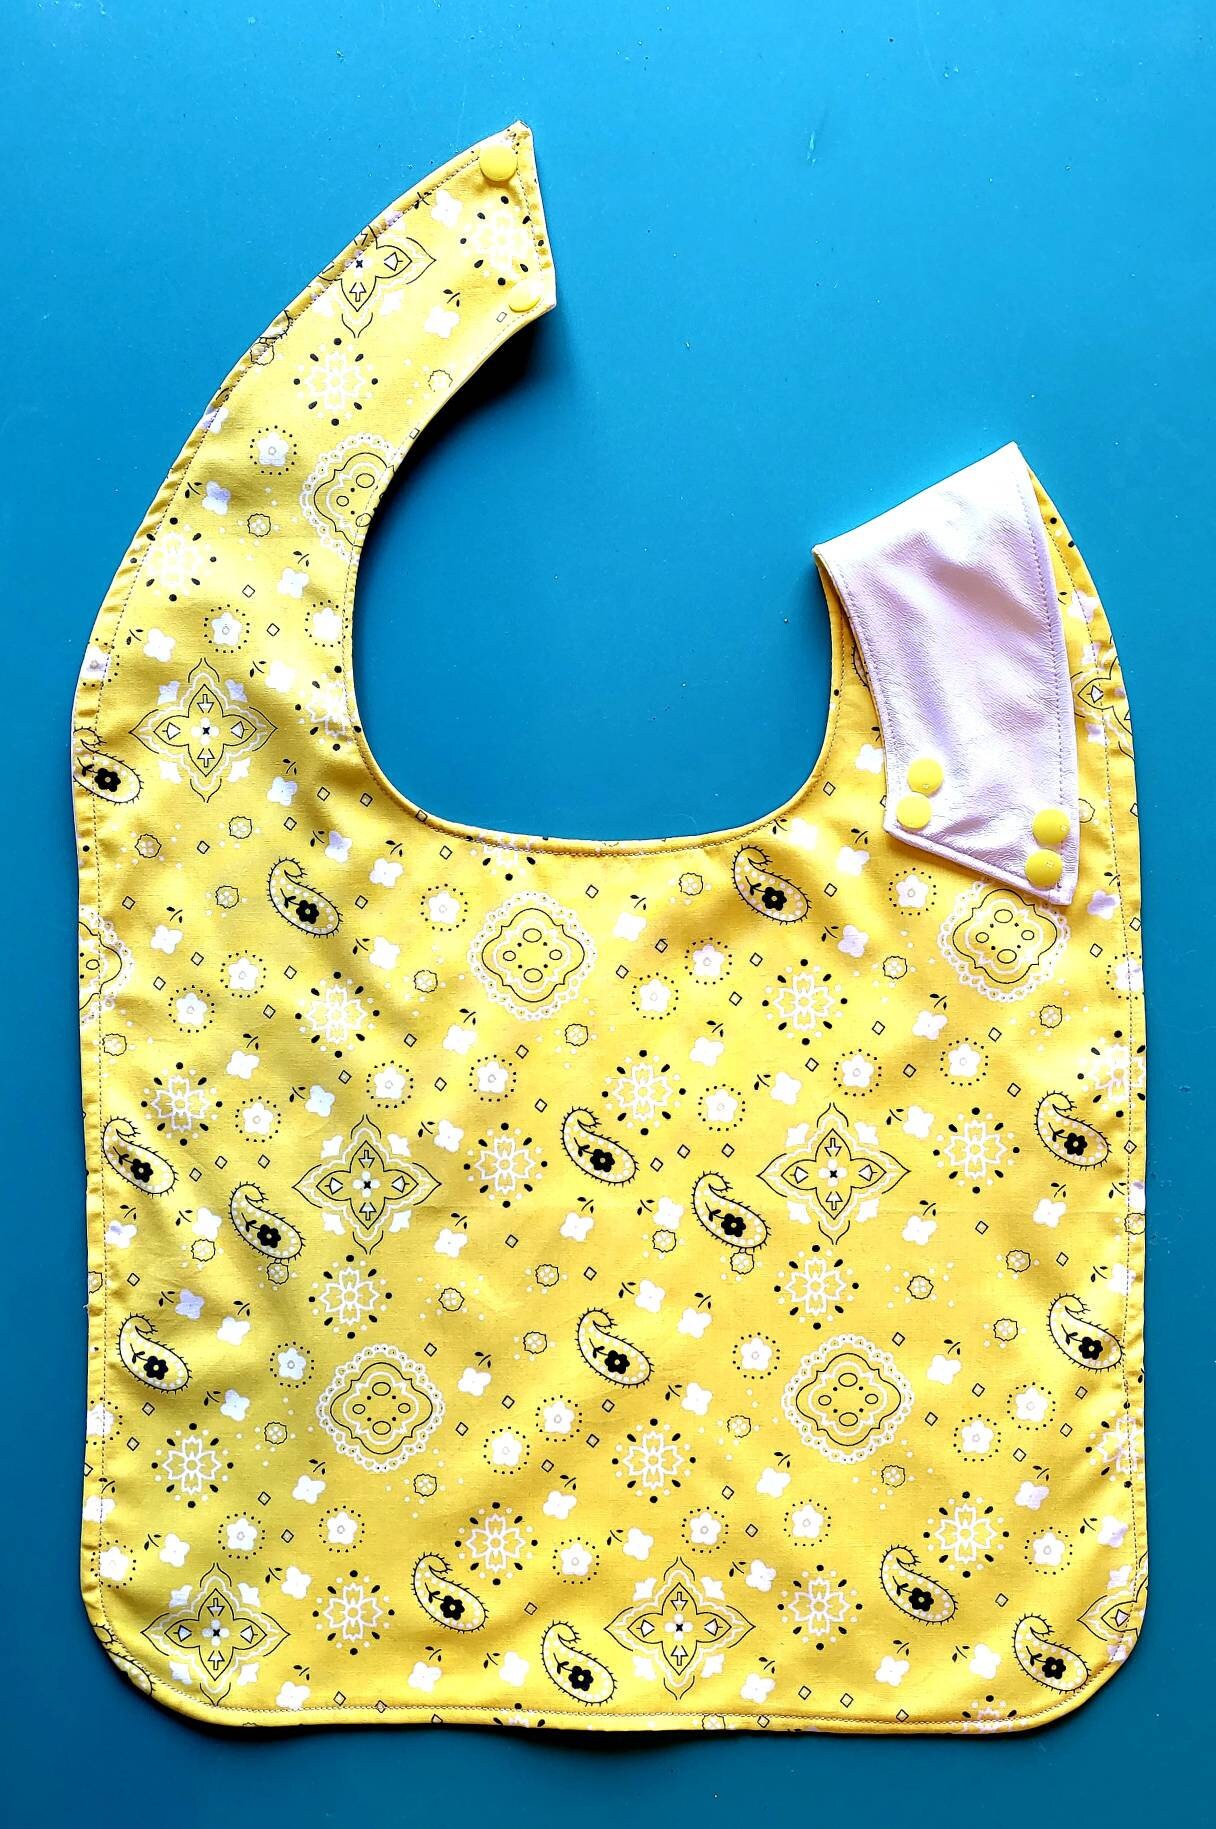 lightweight and comfortable to wear High quality Bib is soft Bib/clothing protector is made of cotton fabric More styles Accessoires Sjaals & omslagdoeken Kragen & slabben Top buy. 